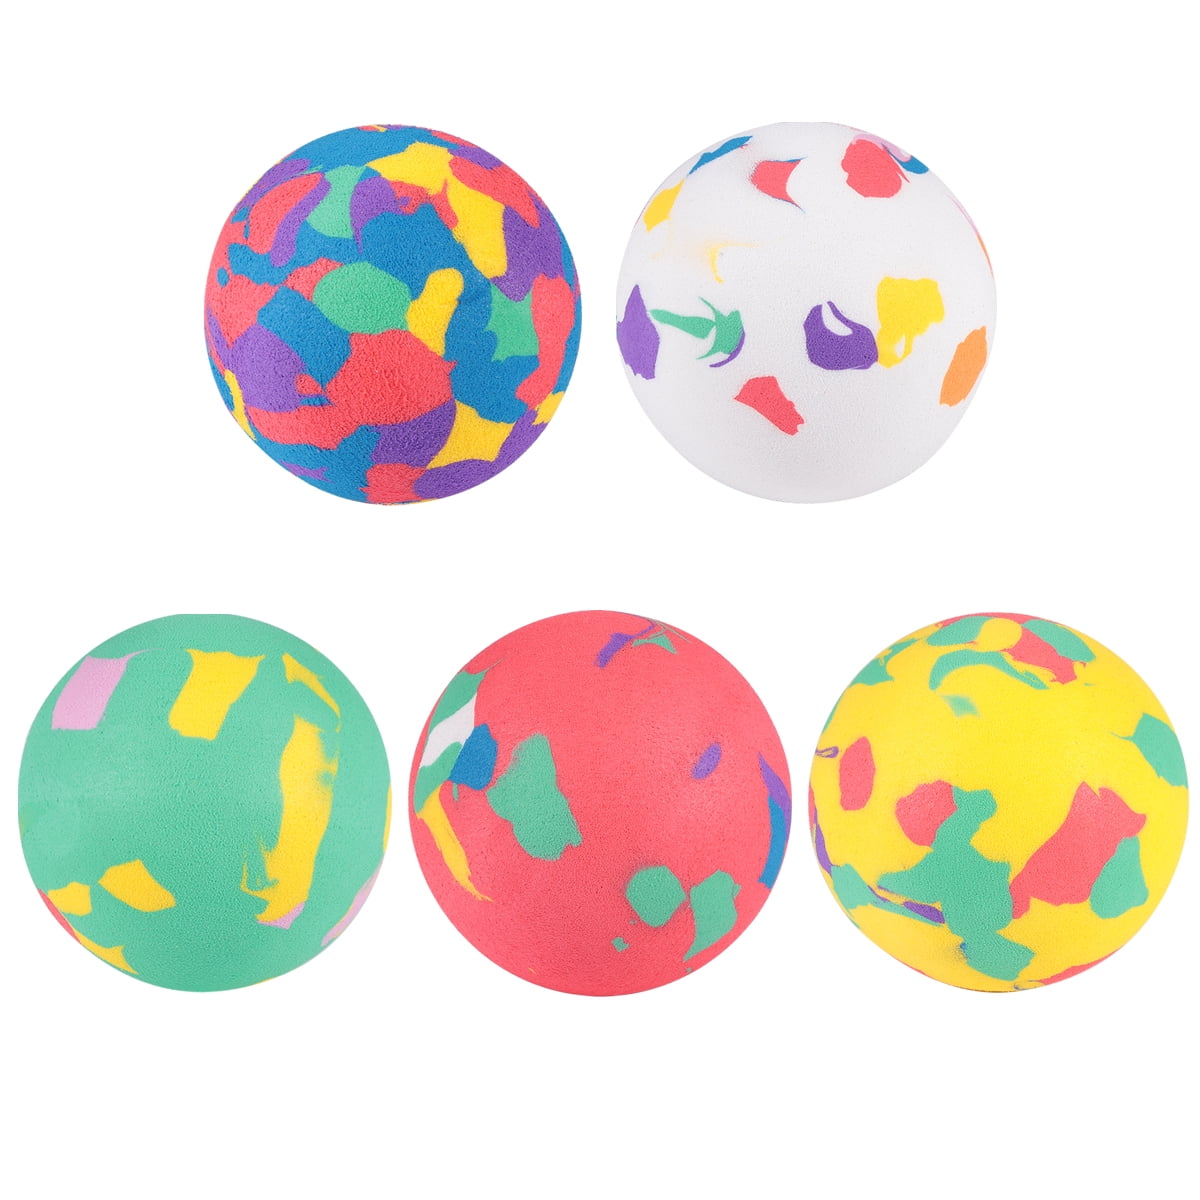 Anzmtos 3PCS Small Kids Bouncy Balls for Home/Office Toddlers Replacement Rubber 